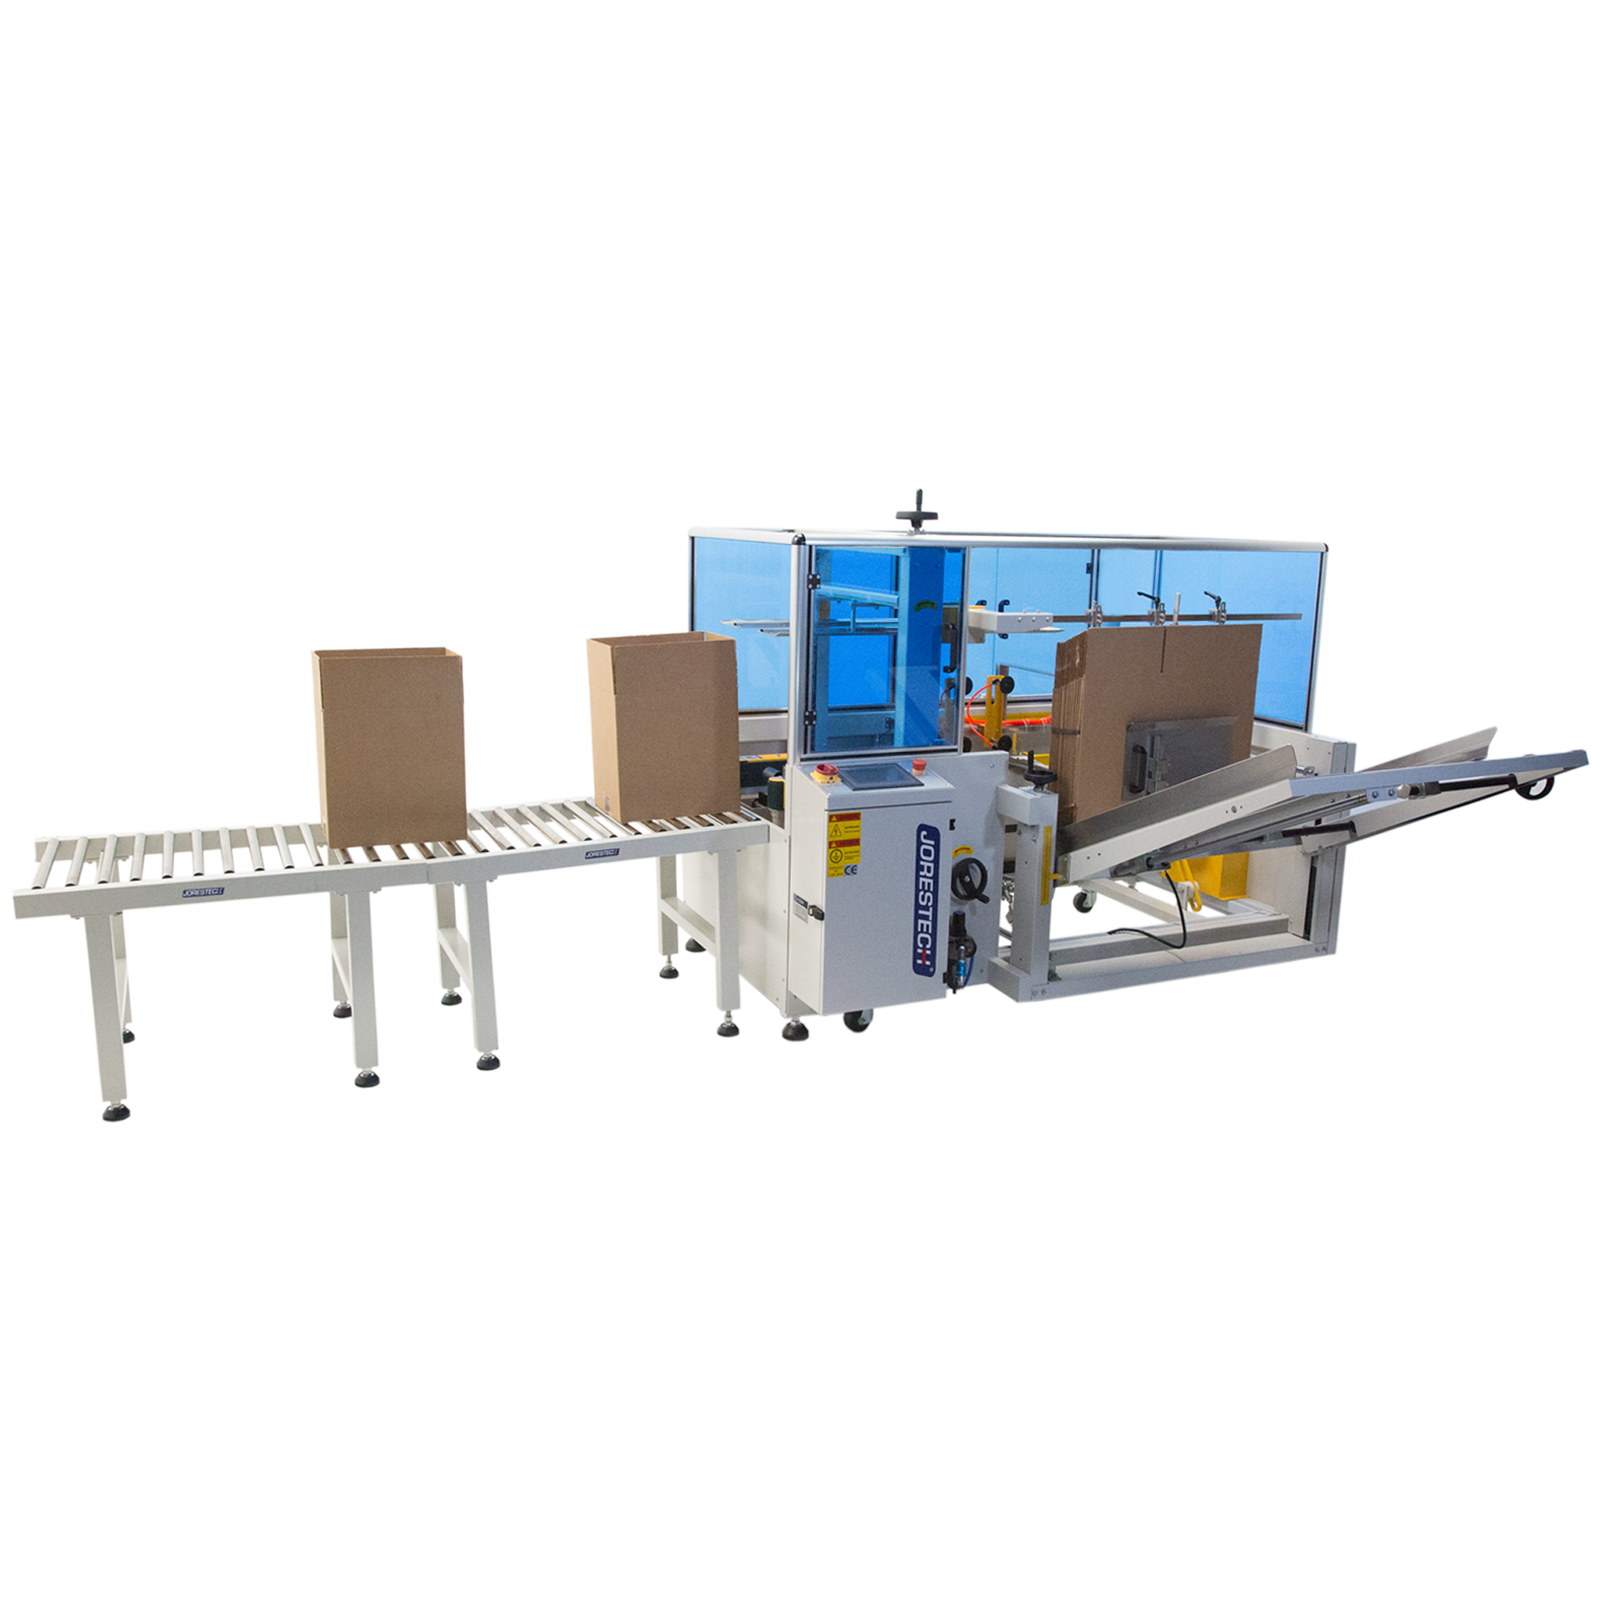 Automatic case erector filled with brown unformed brown boxes. The machine is sealing the bottom of the boxes and they exit the sealer ready to be used.